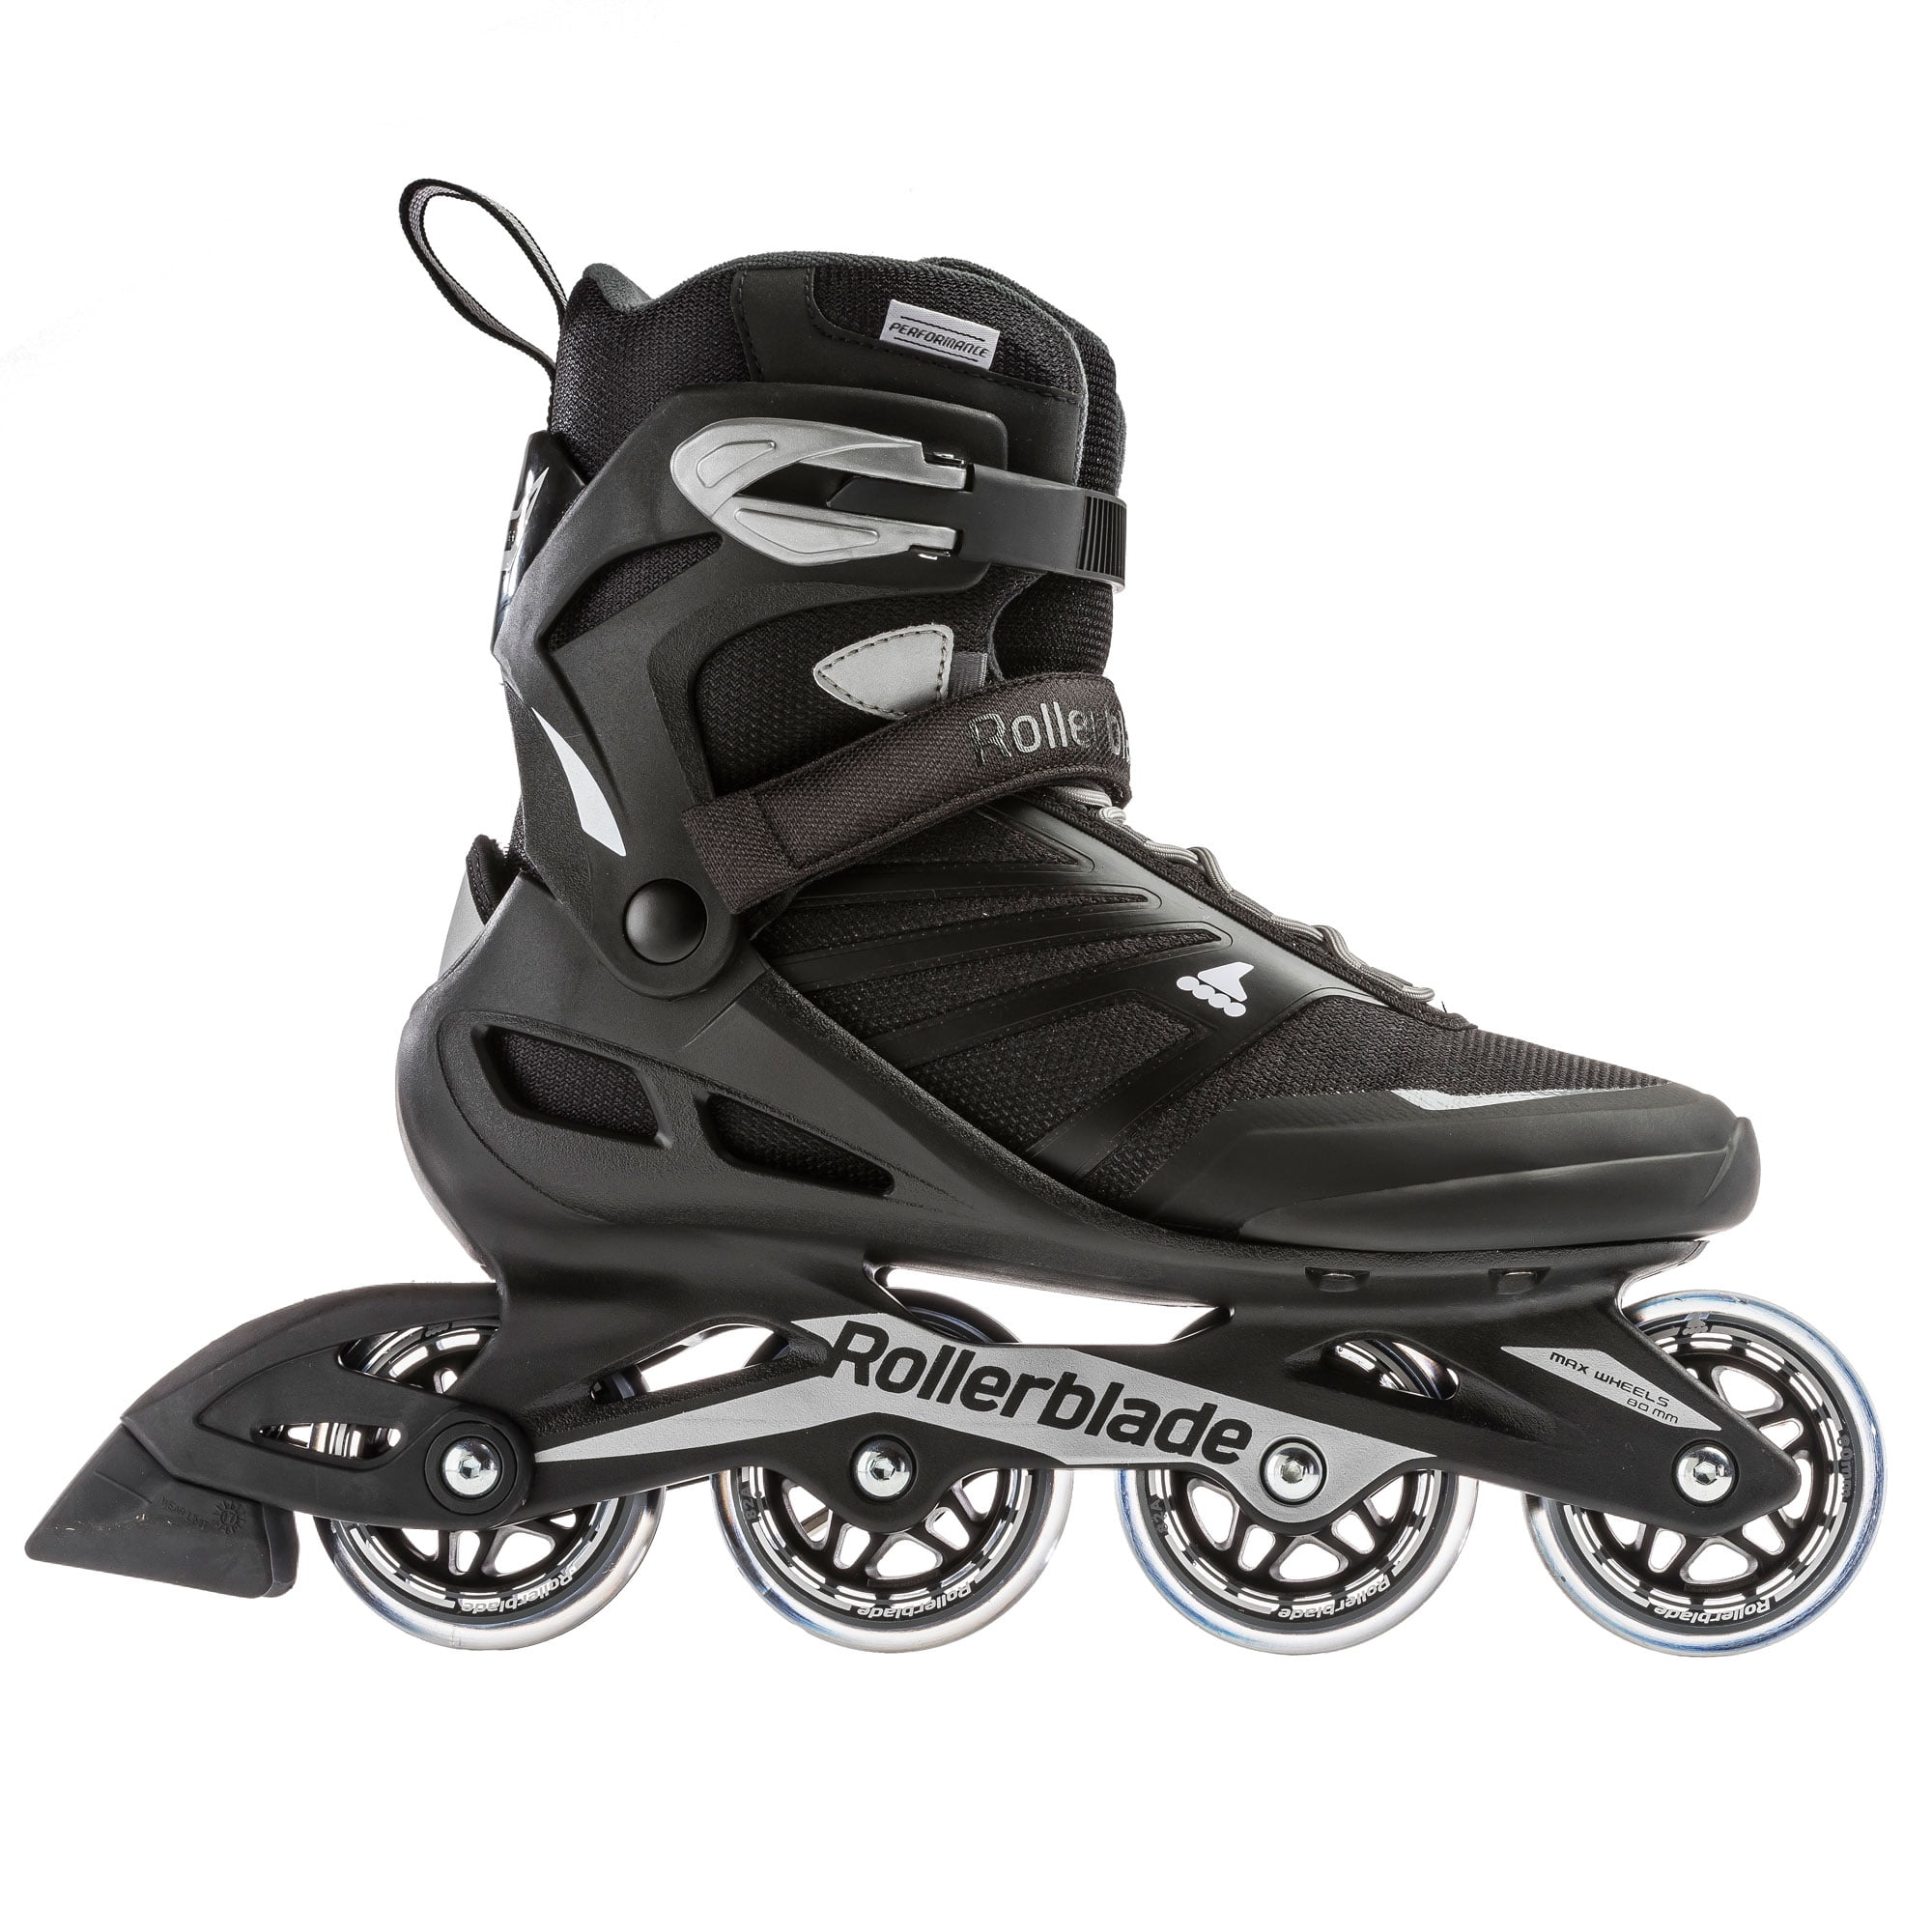 STMAX Rollerblades for Women ABEC 7 Size 9.5 Inline Skates for Adults PU Wheels 